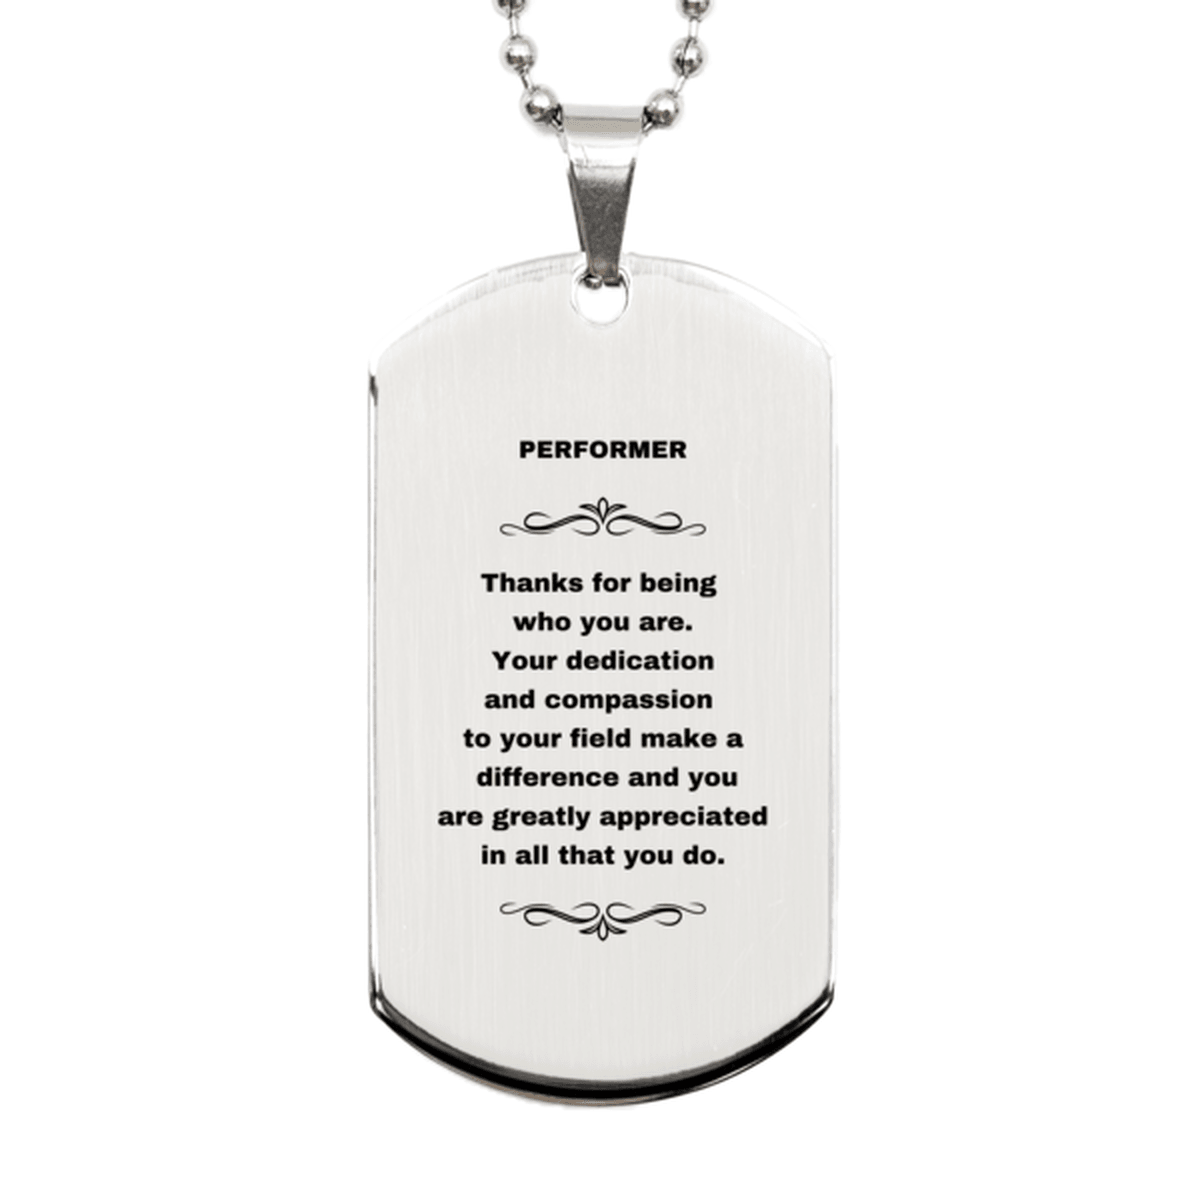 Performer Silver Dog Tag Engraved Necklace - Thanks for being who you are - Birthday Christmas Jewelry Gifts Coworkers Colleague Boss - Mallard Moon Gift Shop